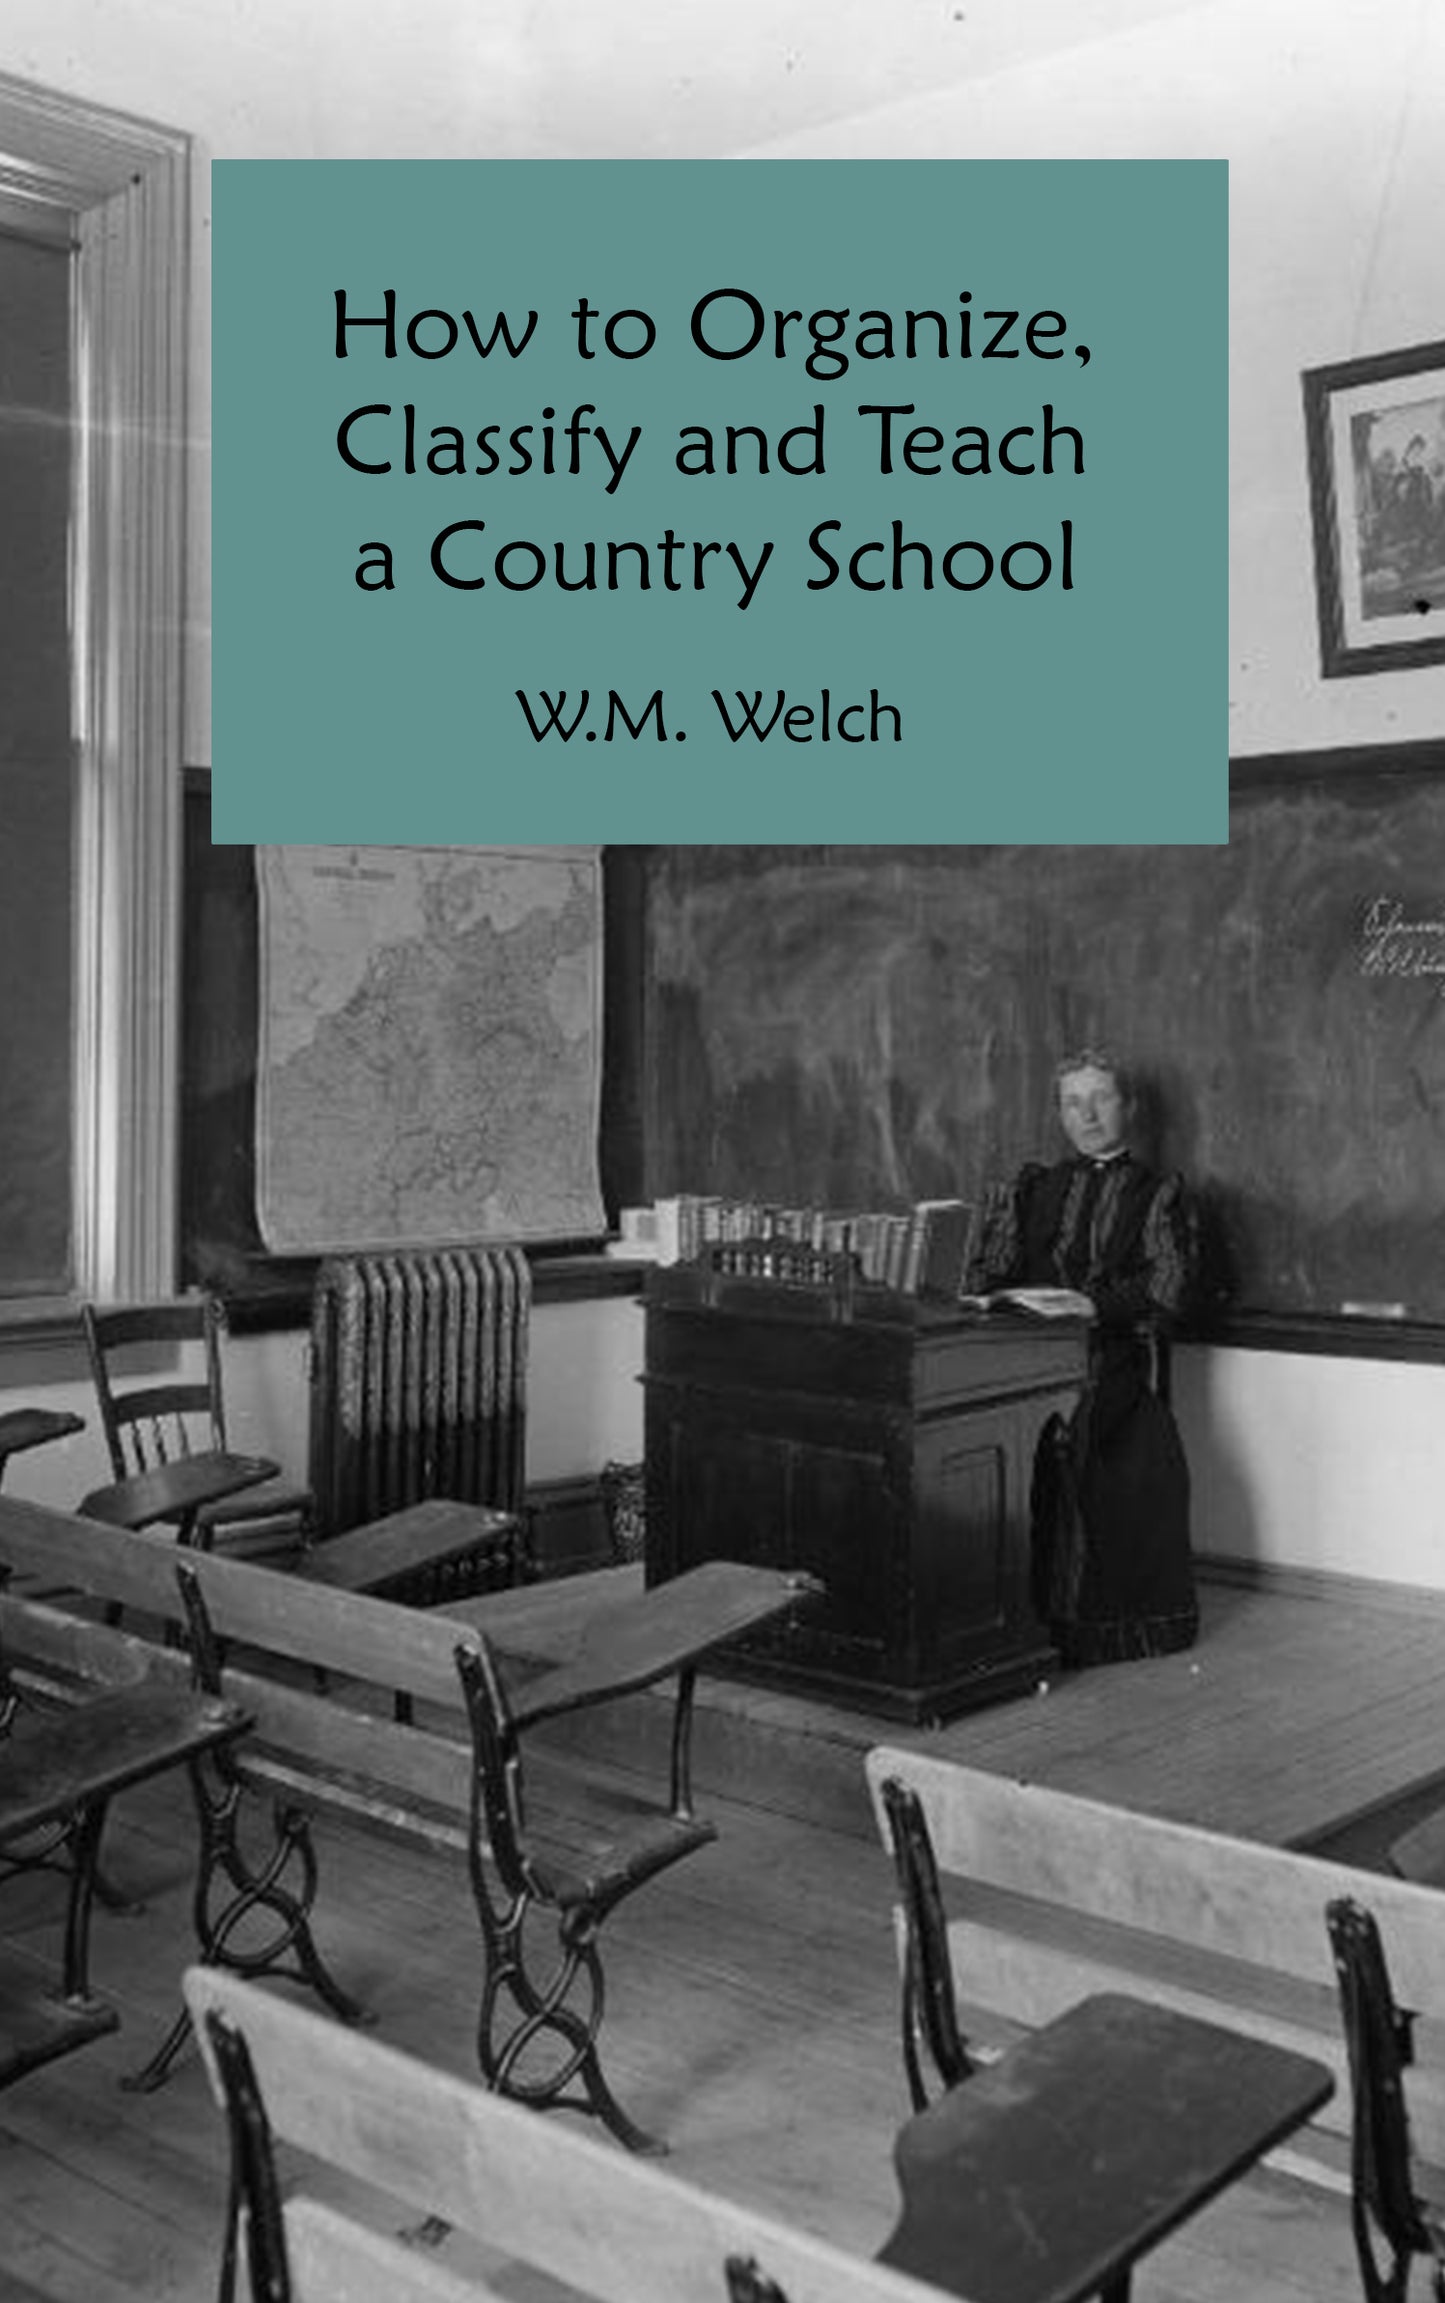 How to Organize, Classify and Teach a Country School